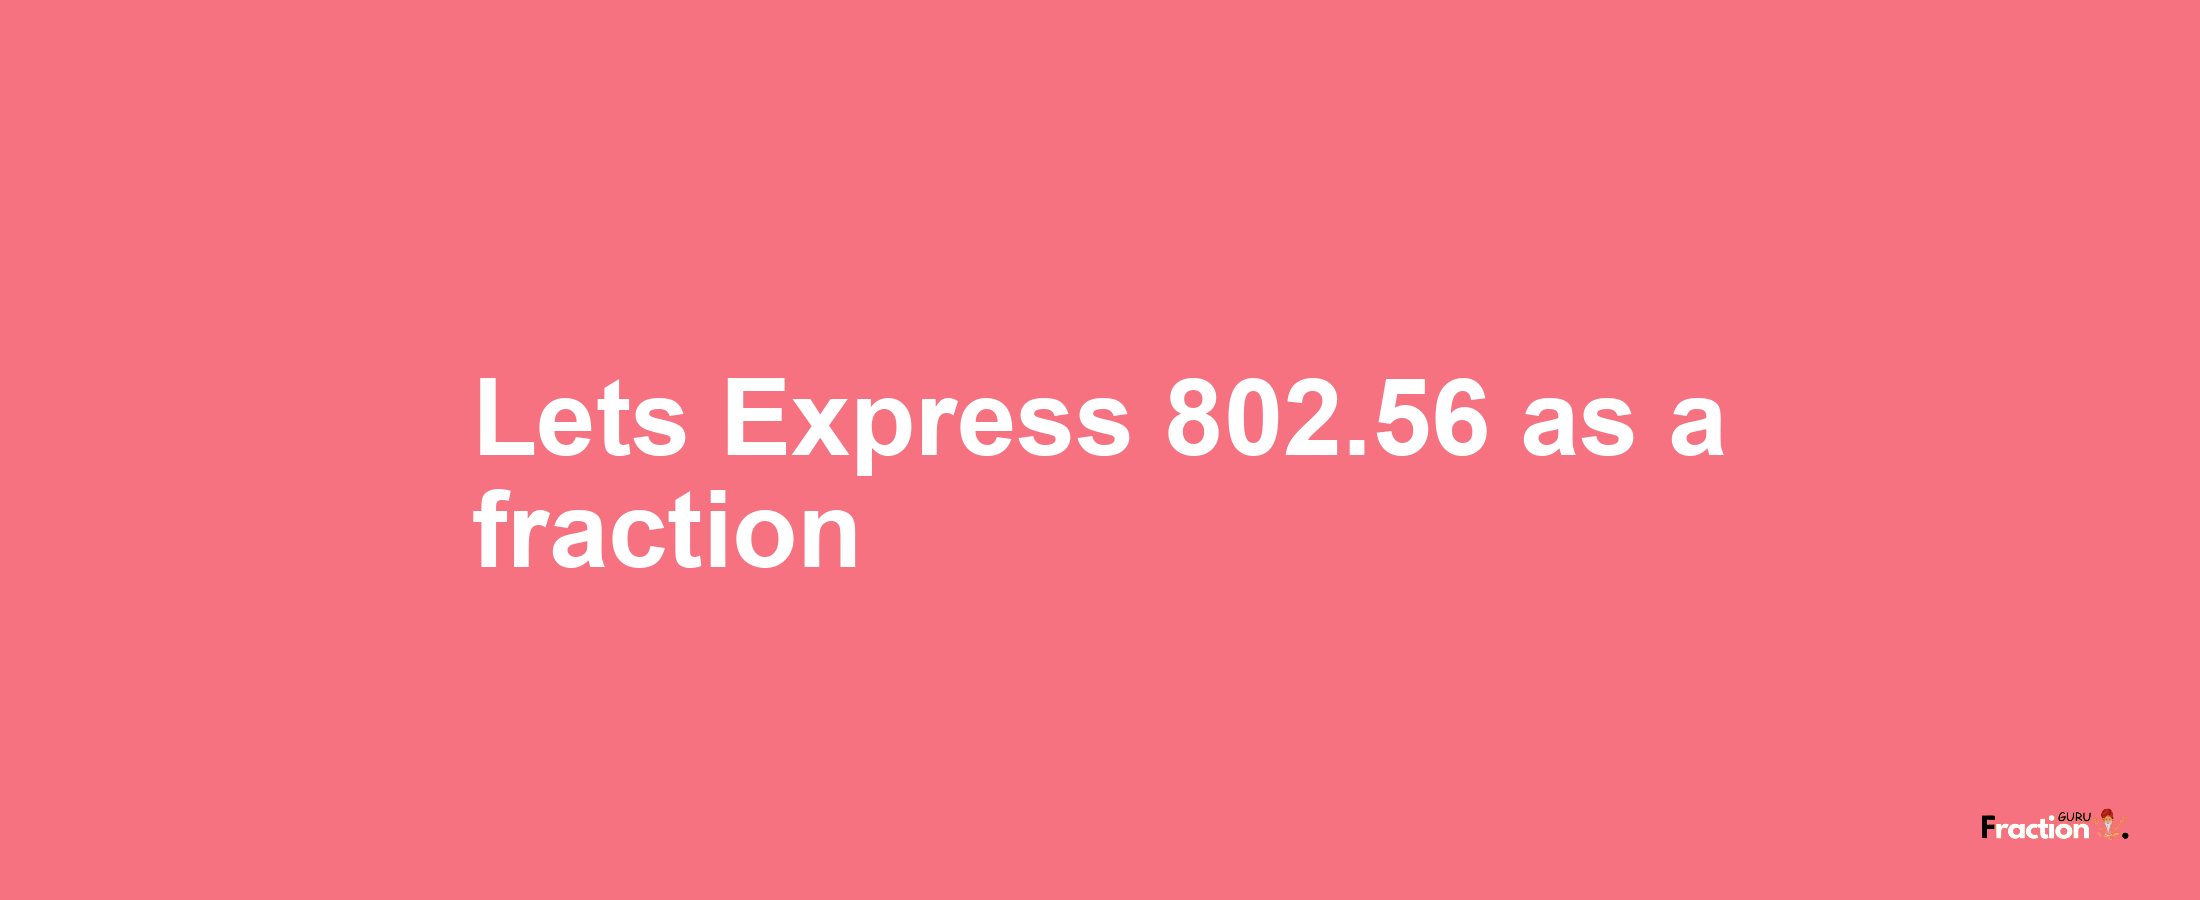 Lets Express 802.56 as afraction